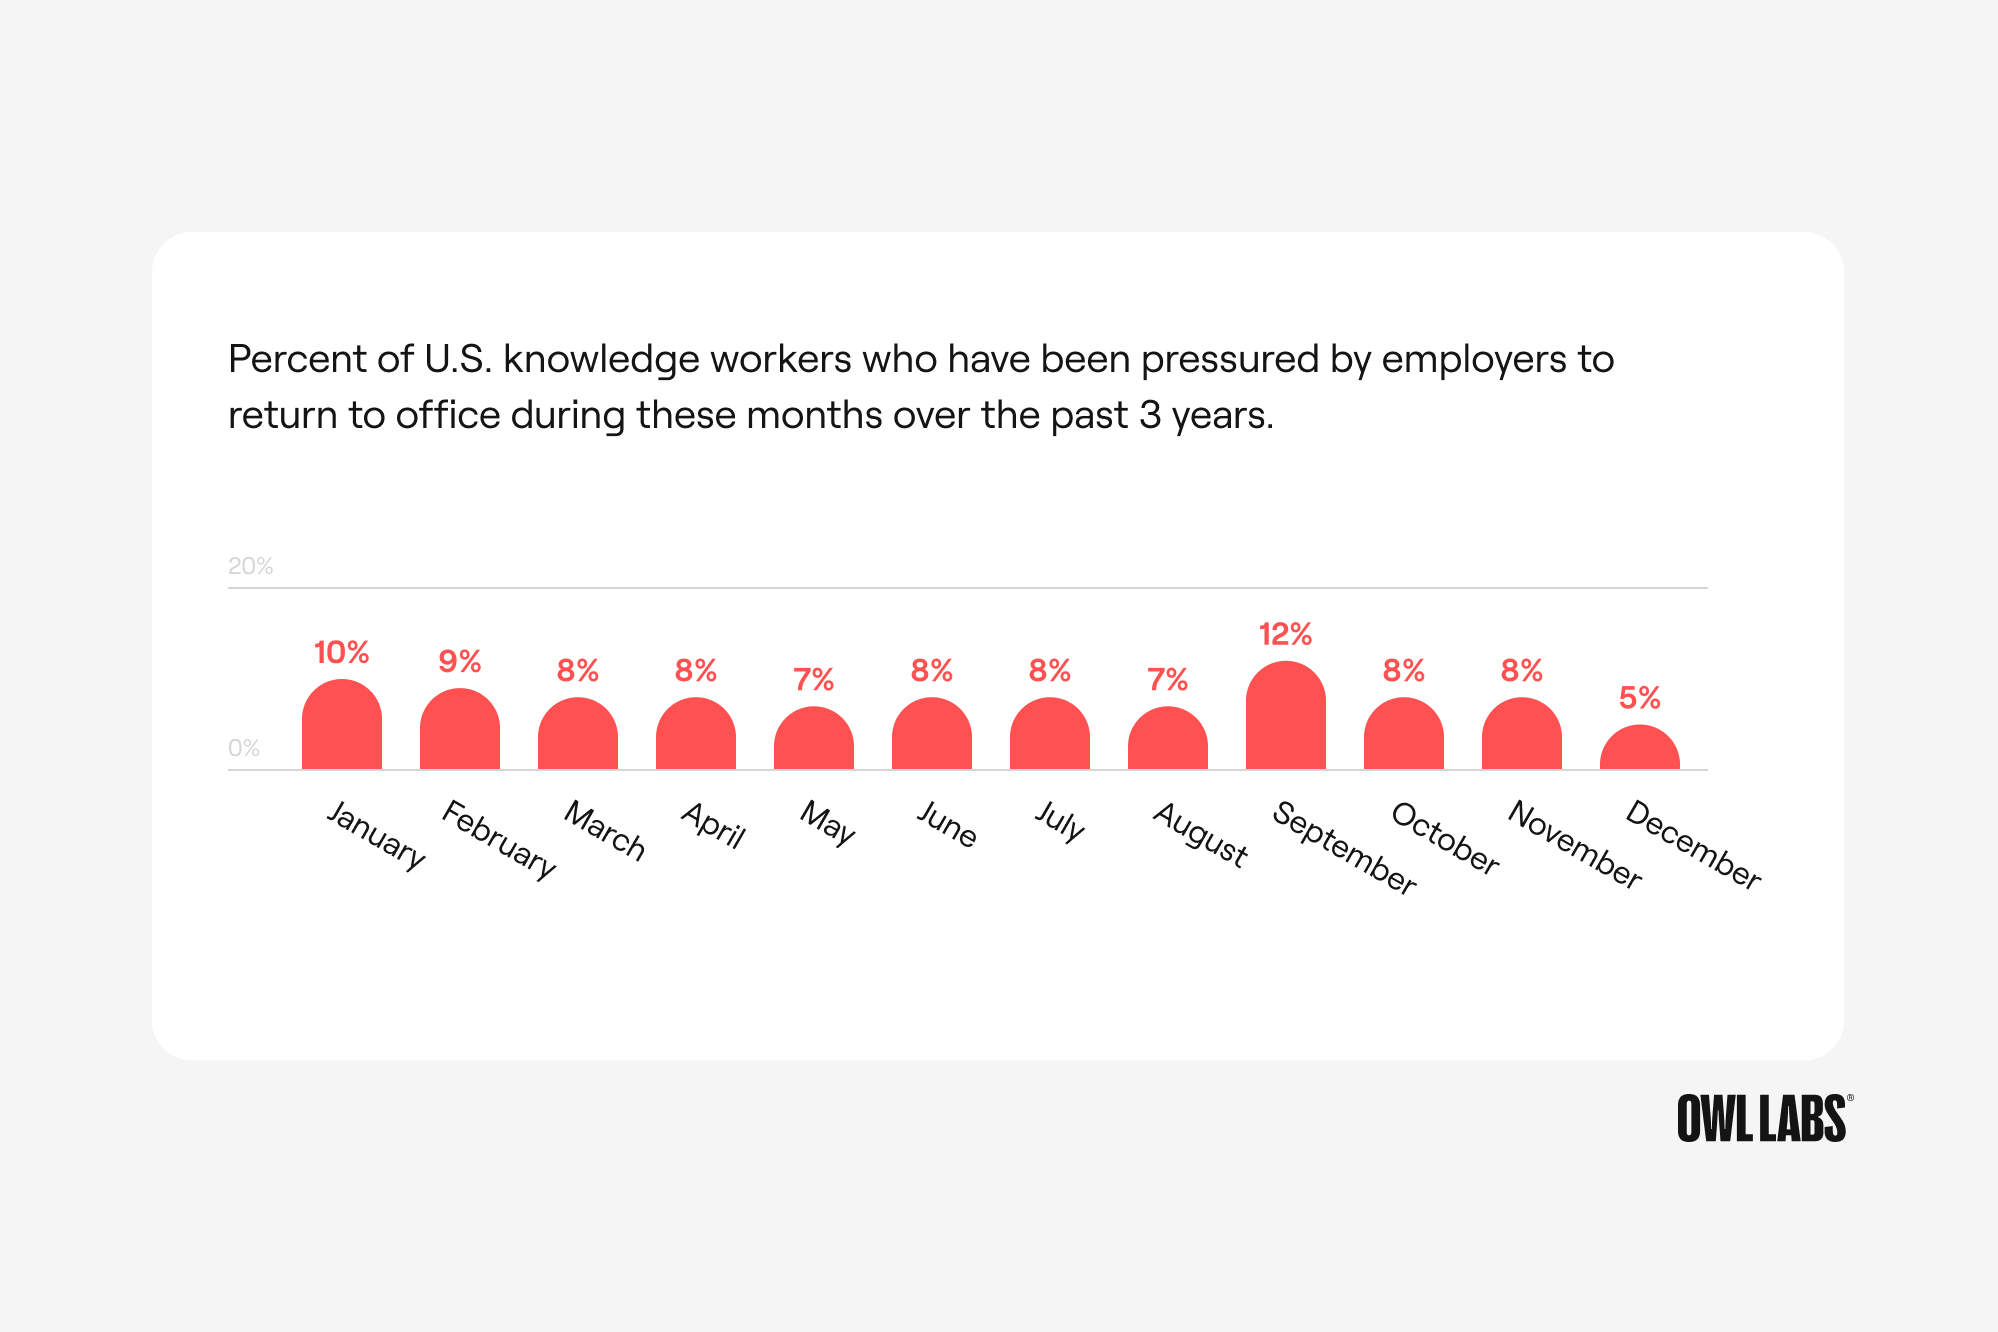 Percent of U.S. knowledge workers who have been pressured by employers to return to office during these months over the past 3 years